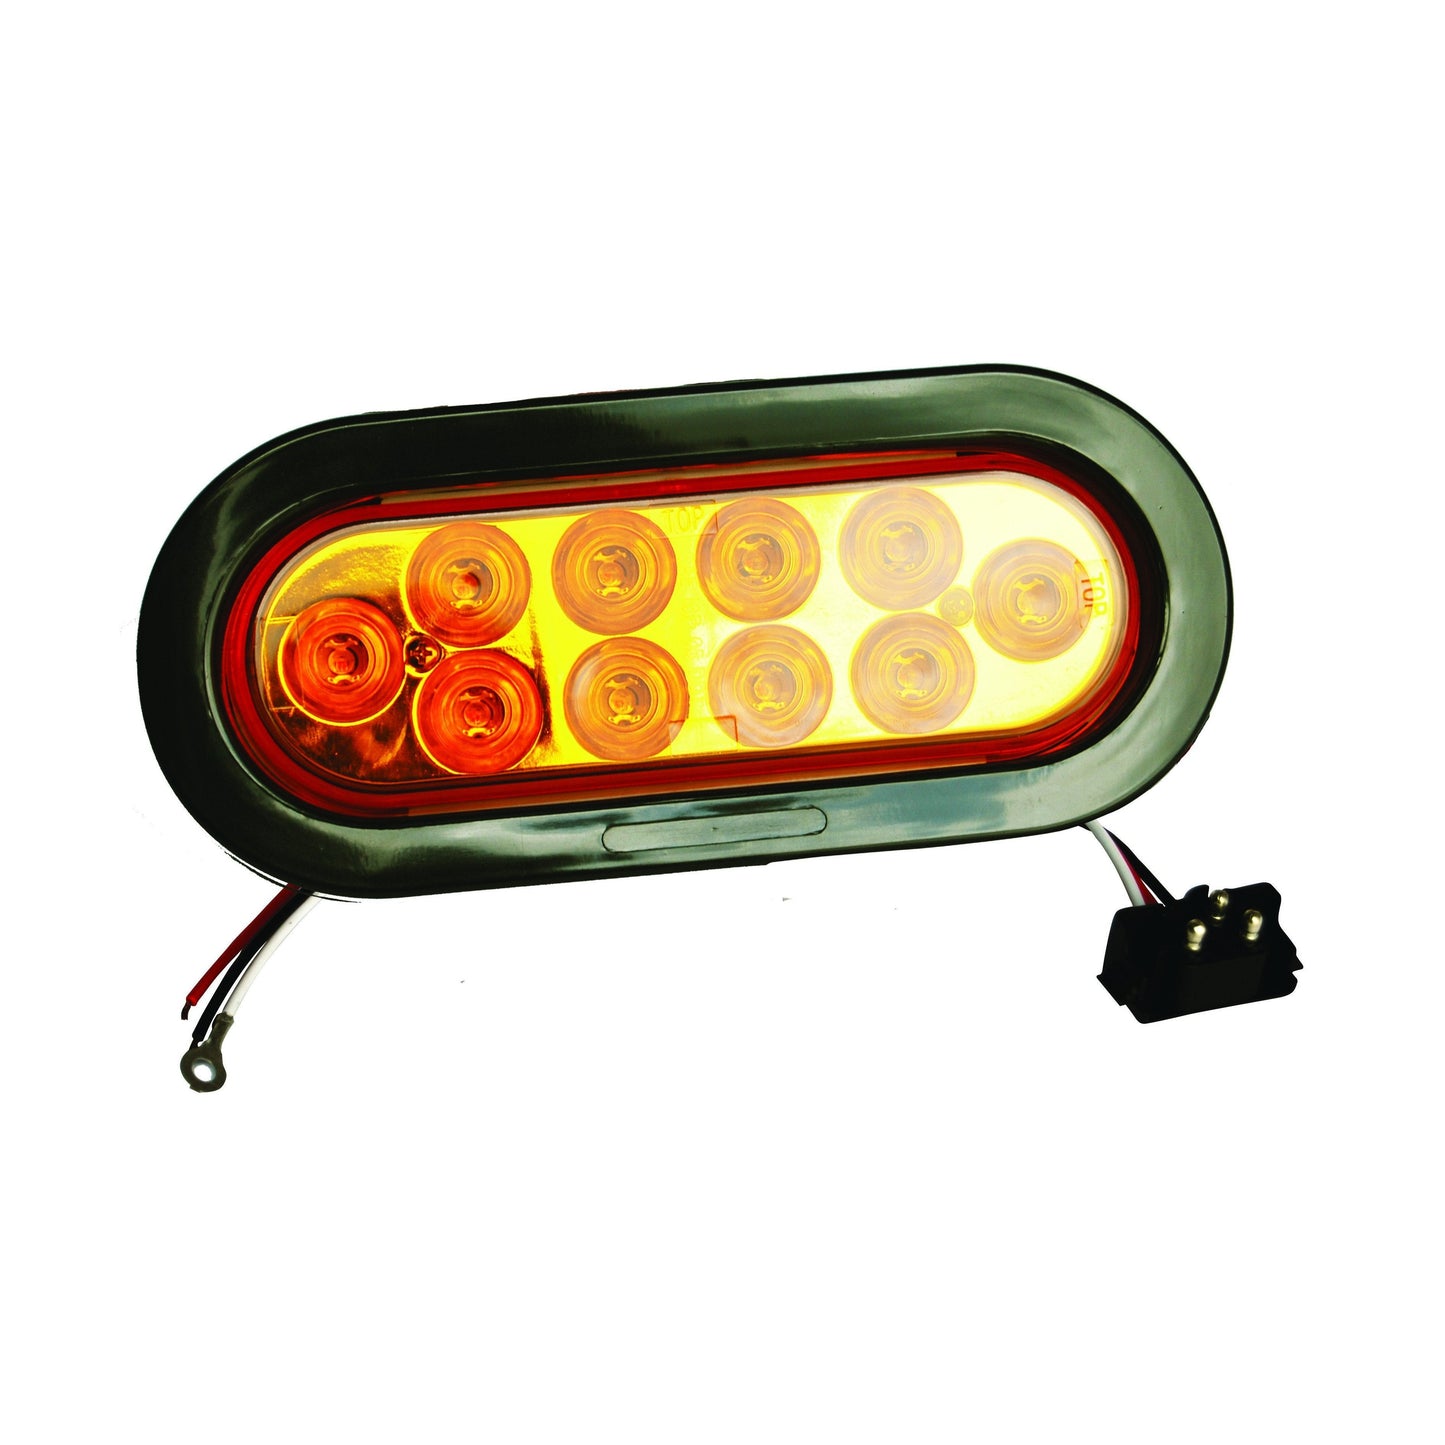 6" Amber Oval Marker/Tail/Turn Led Light With 10 Leds And Amber Lens | F235190